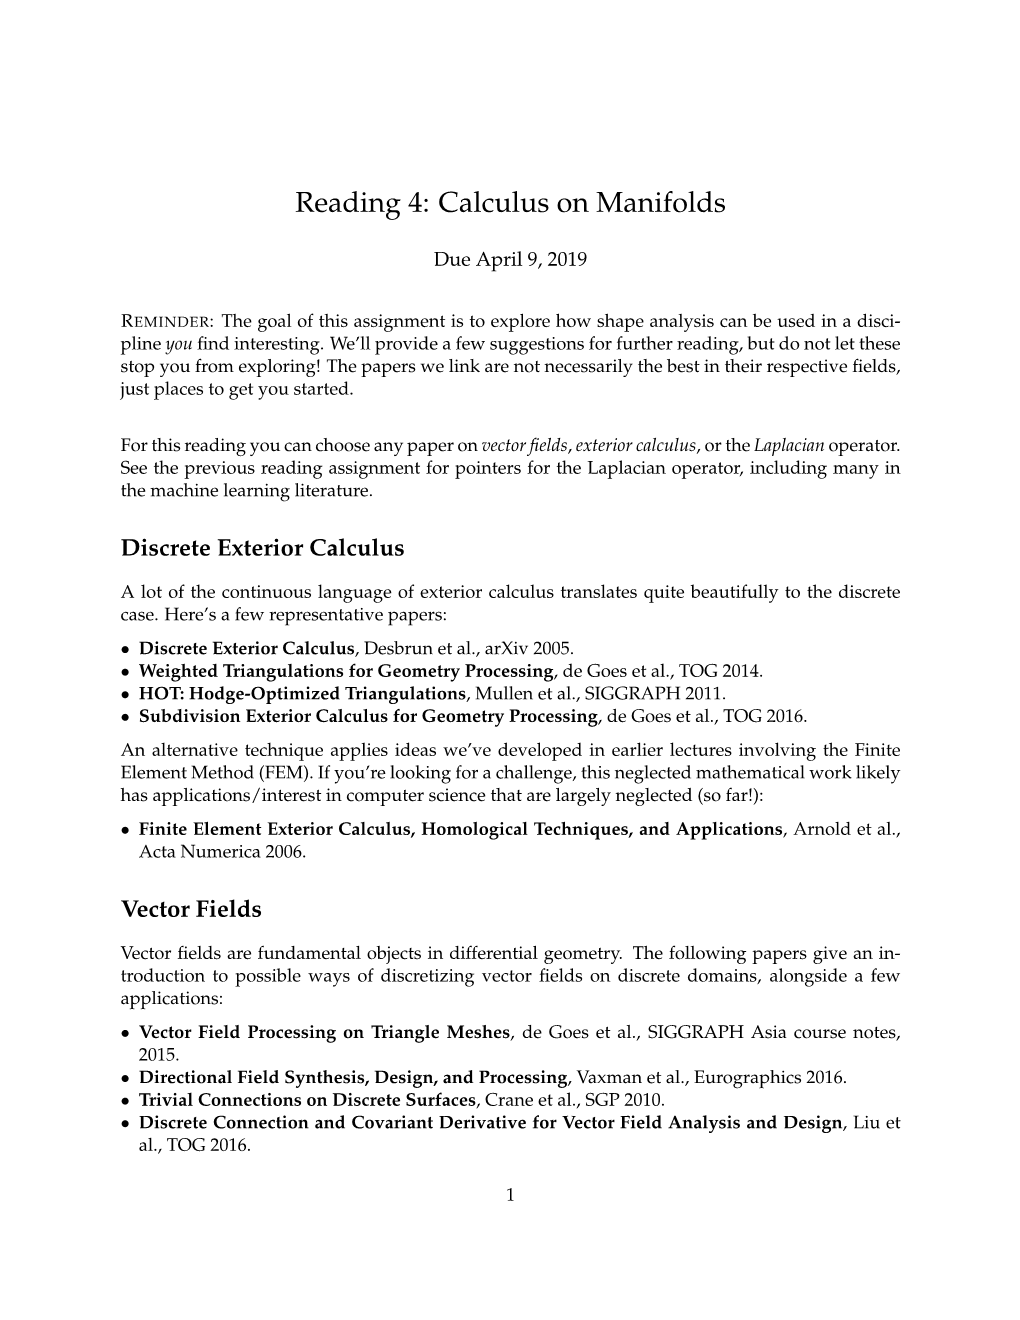 Reading 4: Calculus on Manifolds